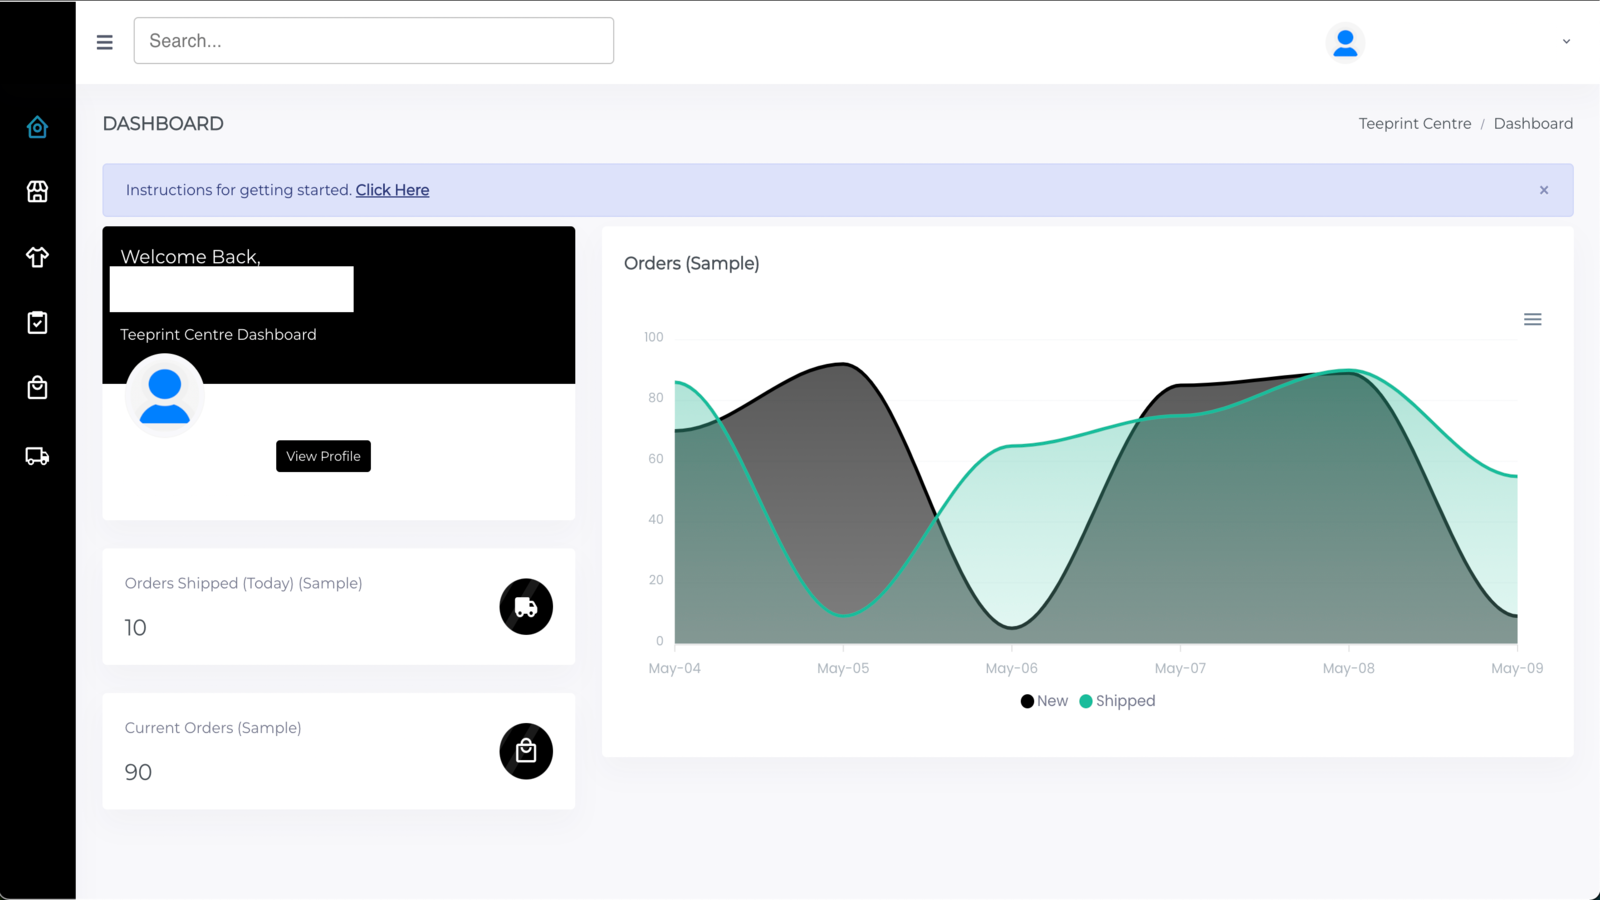 One dashboard that brings together all of your orders